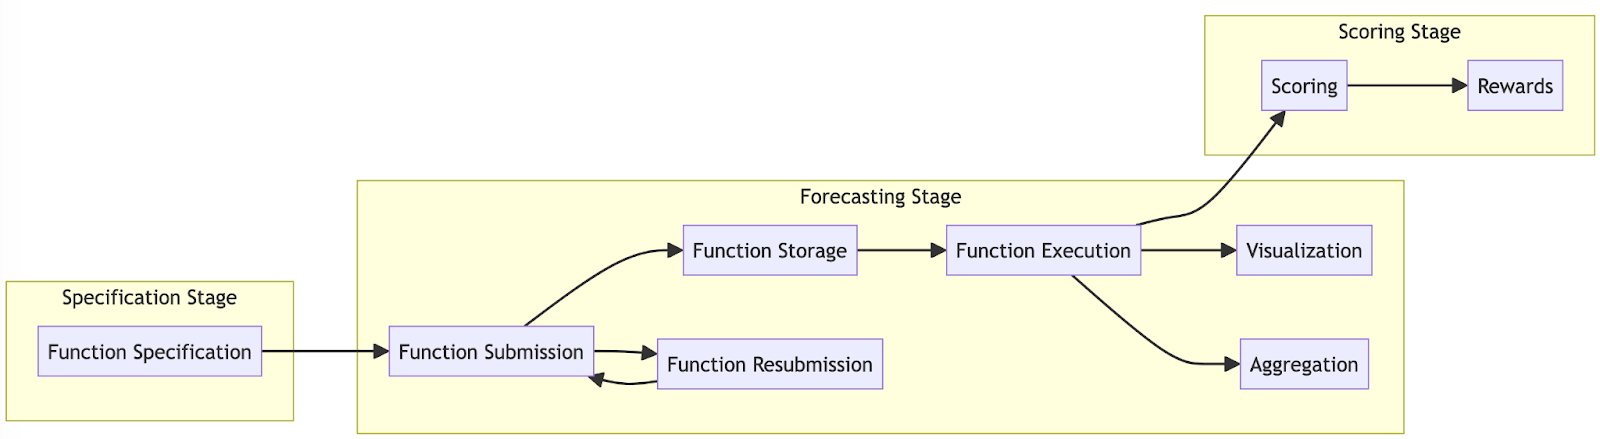 Scorable Functions: A Format for Algorithmic Forecasting